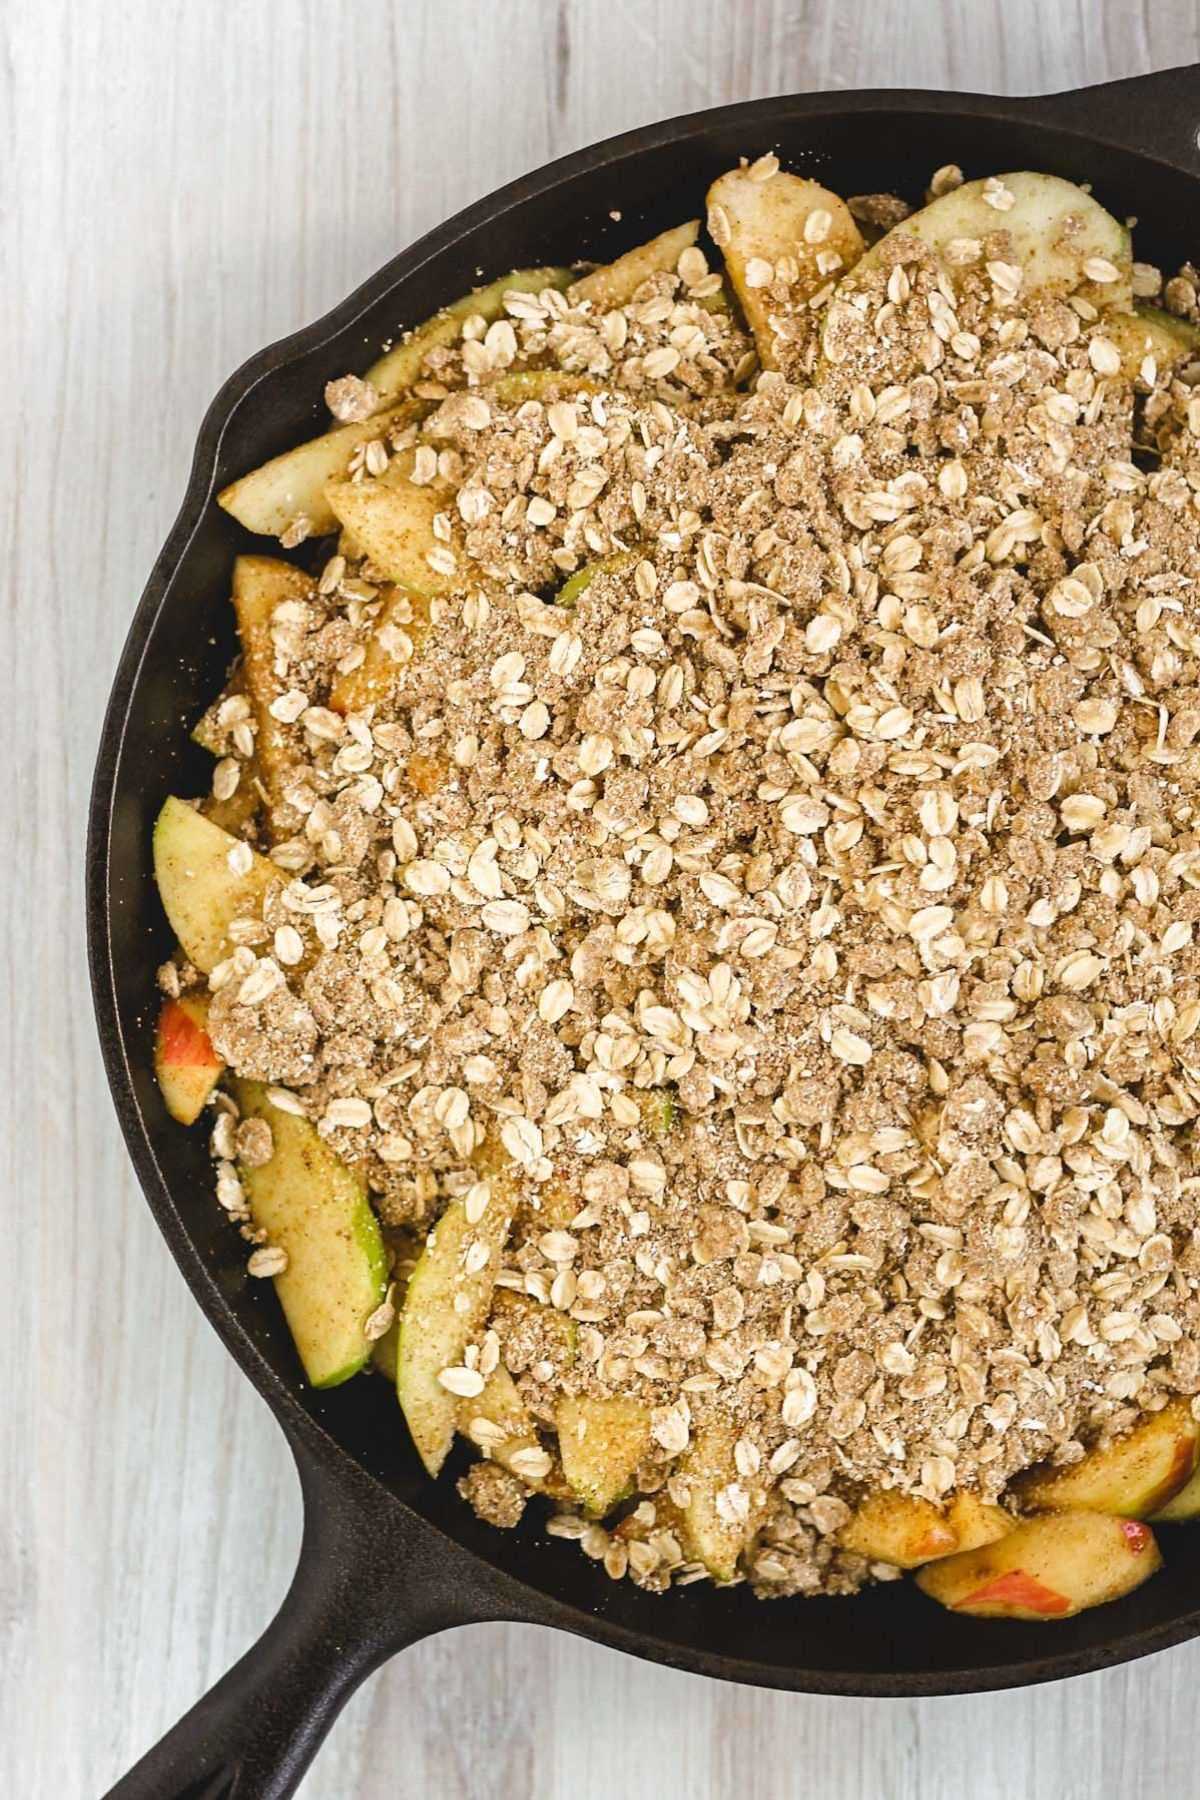 Sliced apples topped with oat crumble topping in a cast iron skillet before baking.